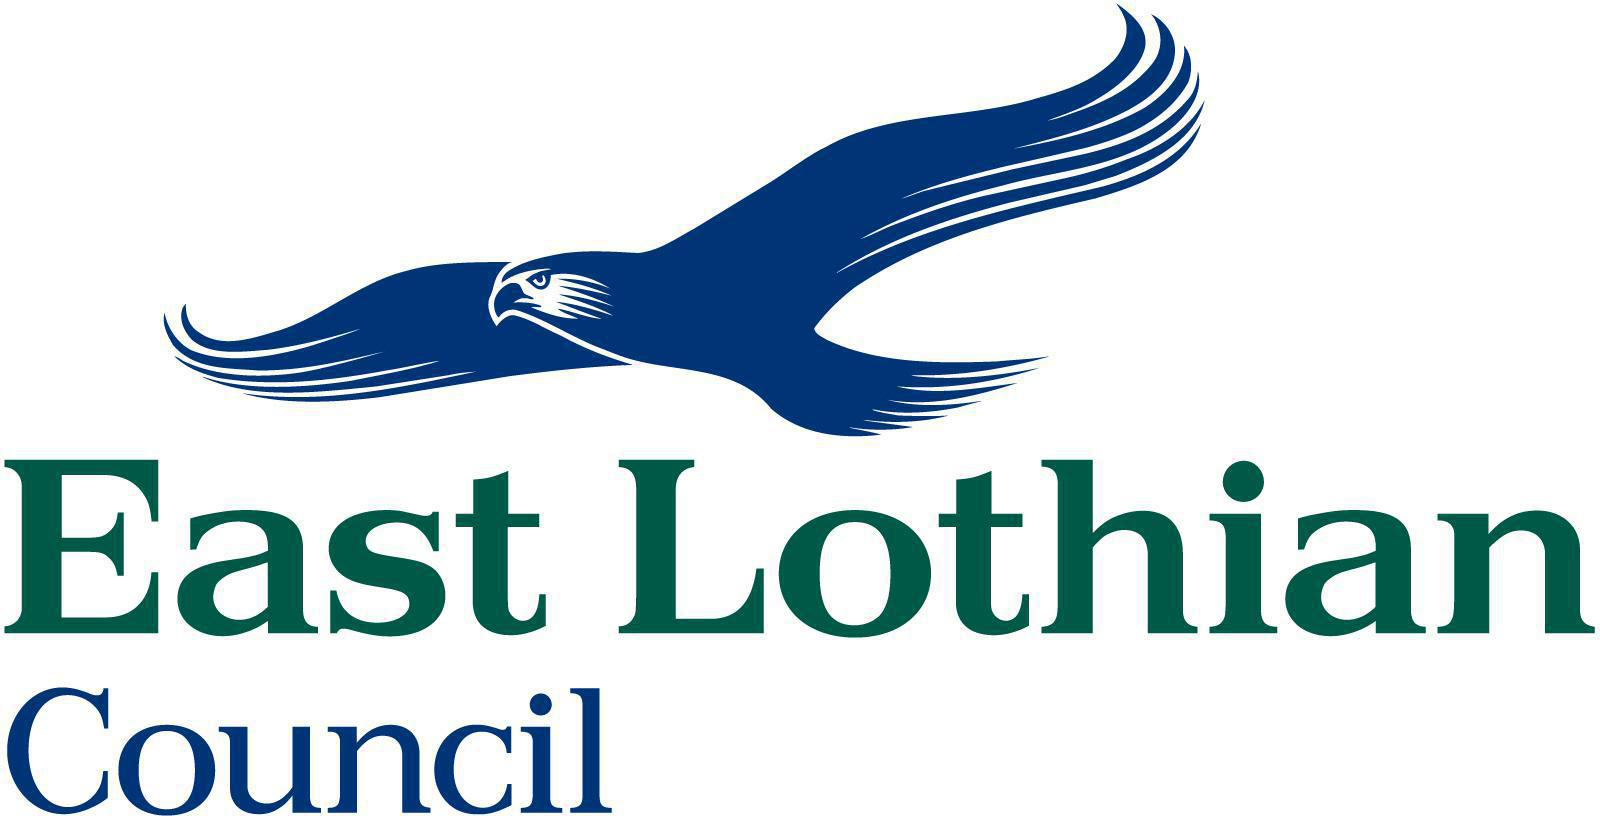 New chief officer structure unveiled at East Lothian Council